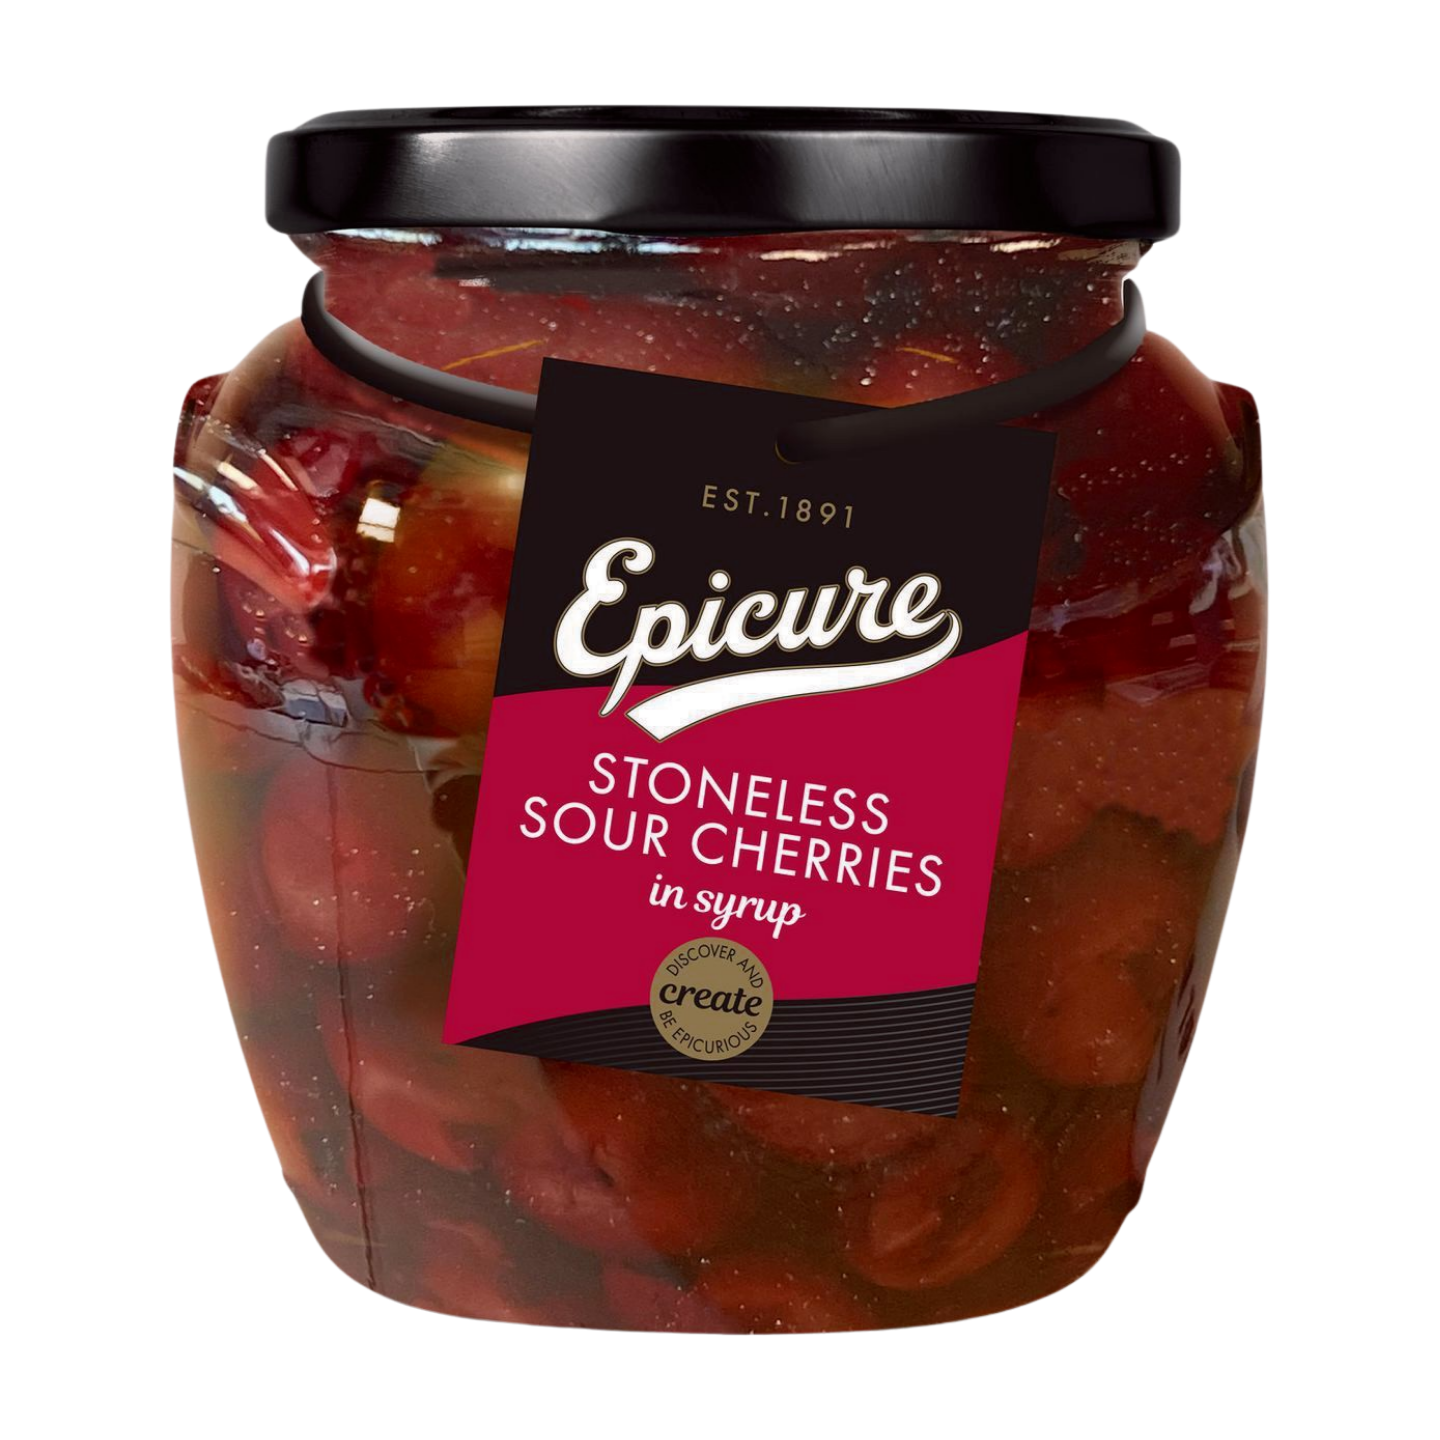 Epicure Stoneless Sour Cherries in Light Syrup (6x570g)